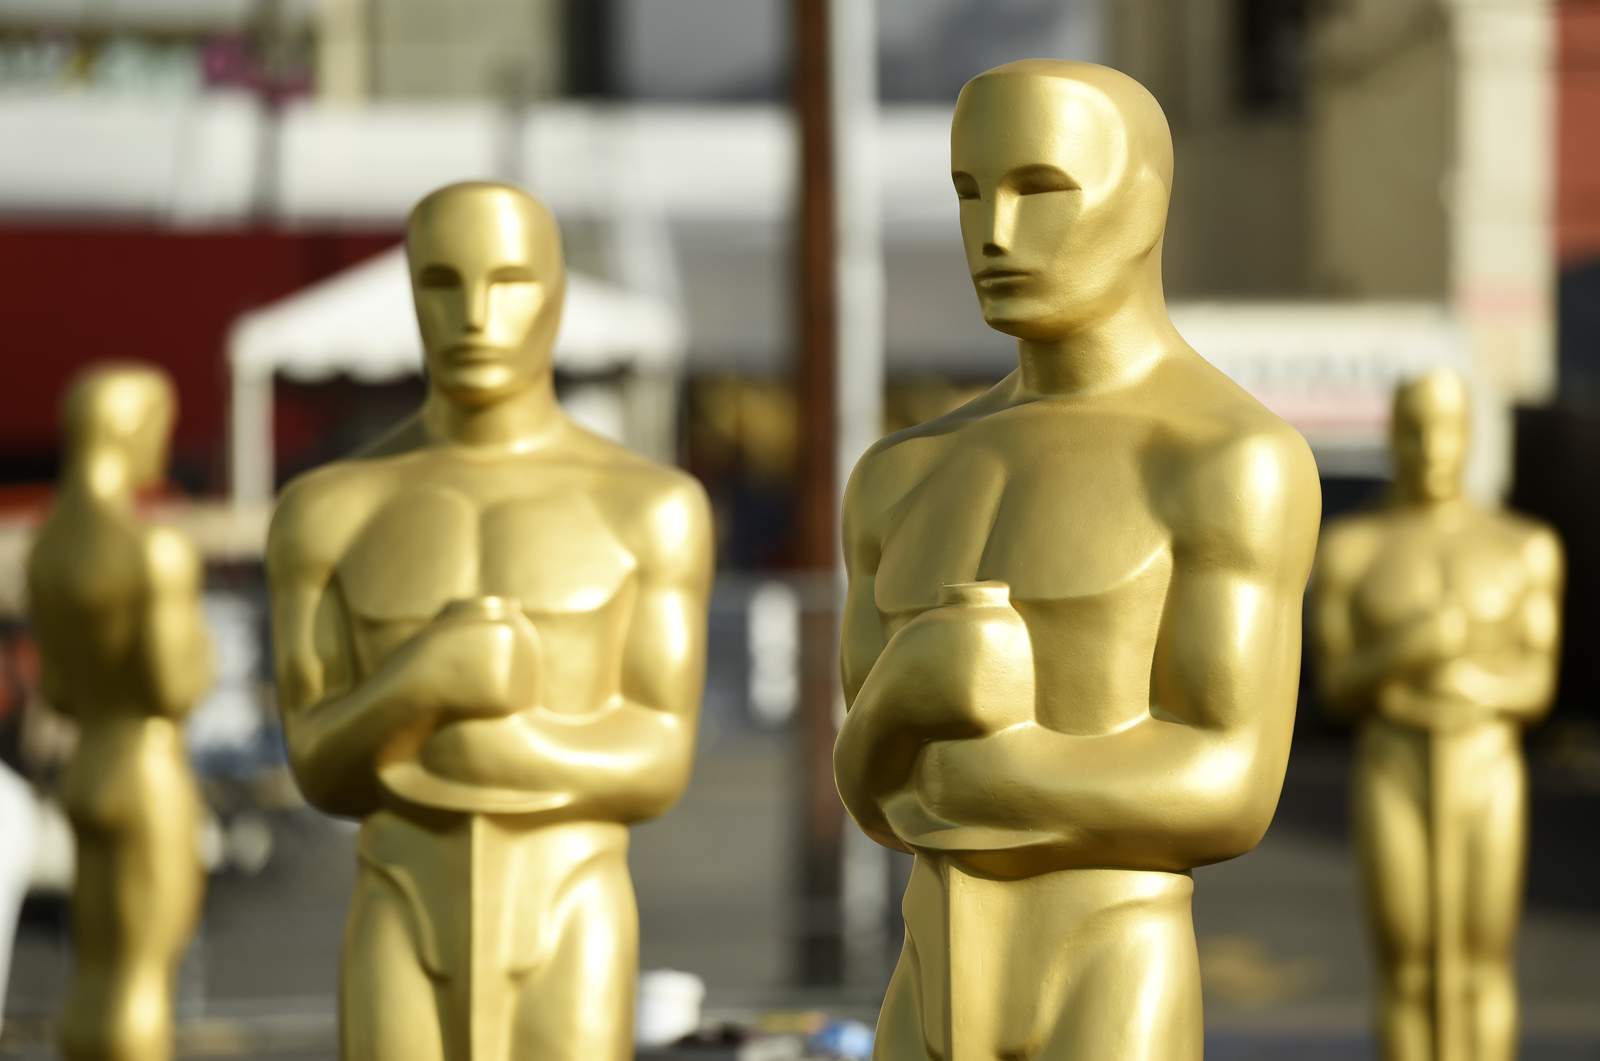 Making Oscar history, 'Parasite' wins best picture